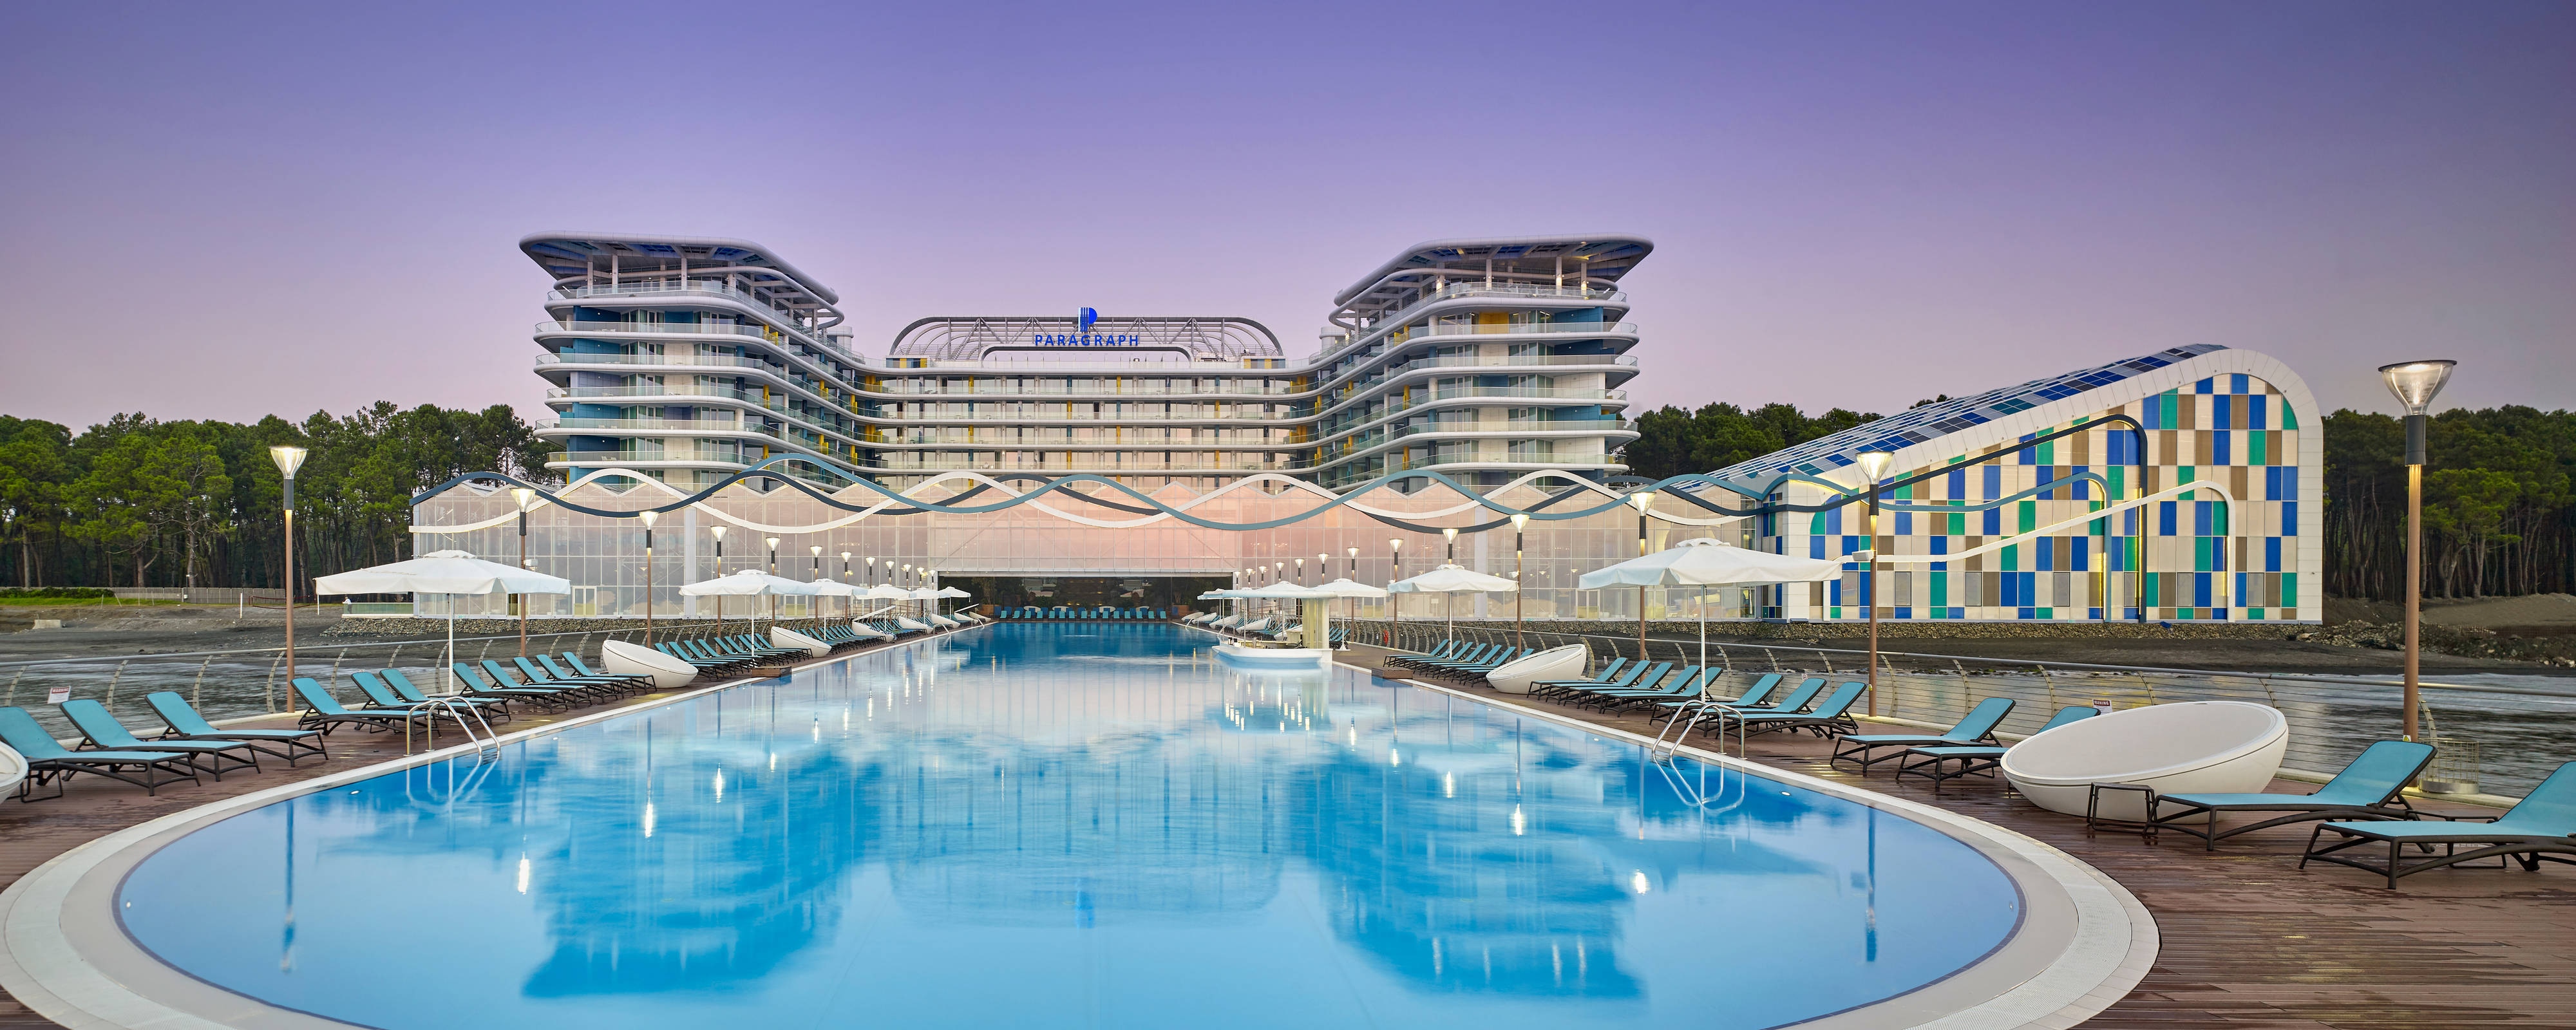 Image for Paragraph Resort & Spa Shekvetili, Autograph Collection, a Marriott hotel.